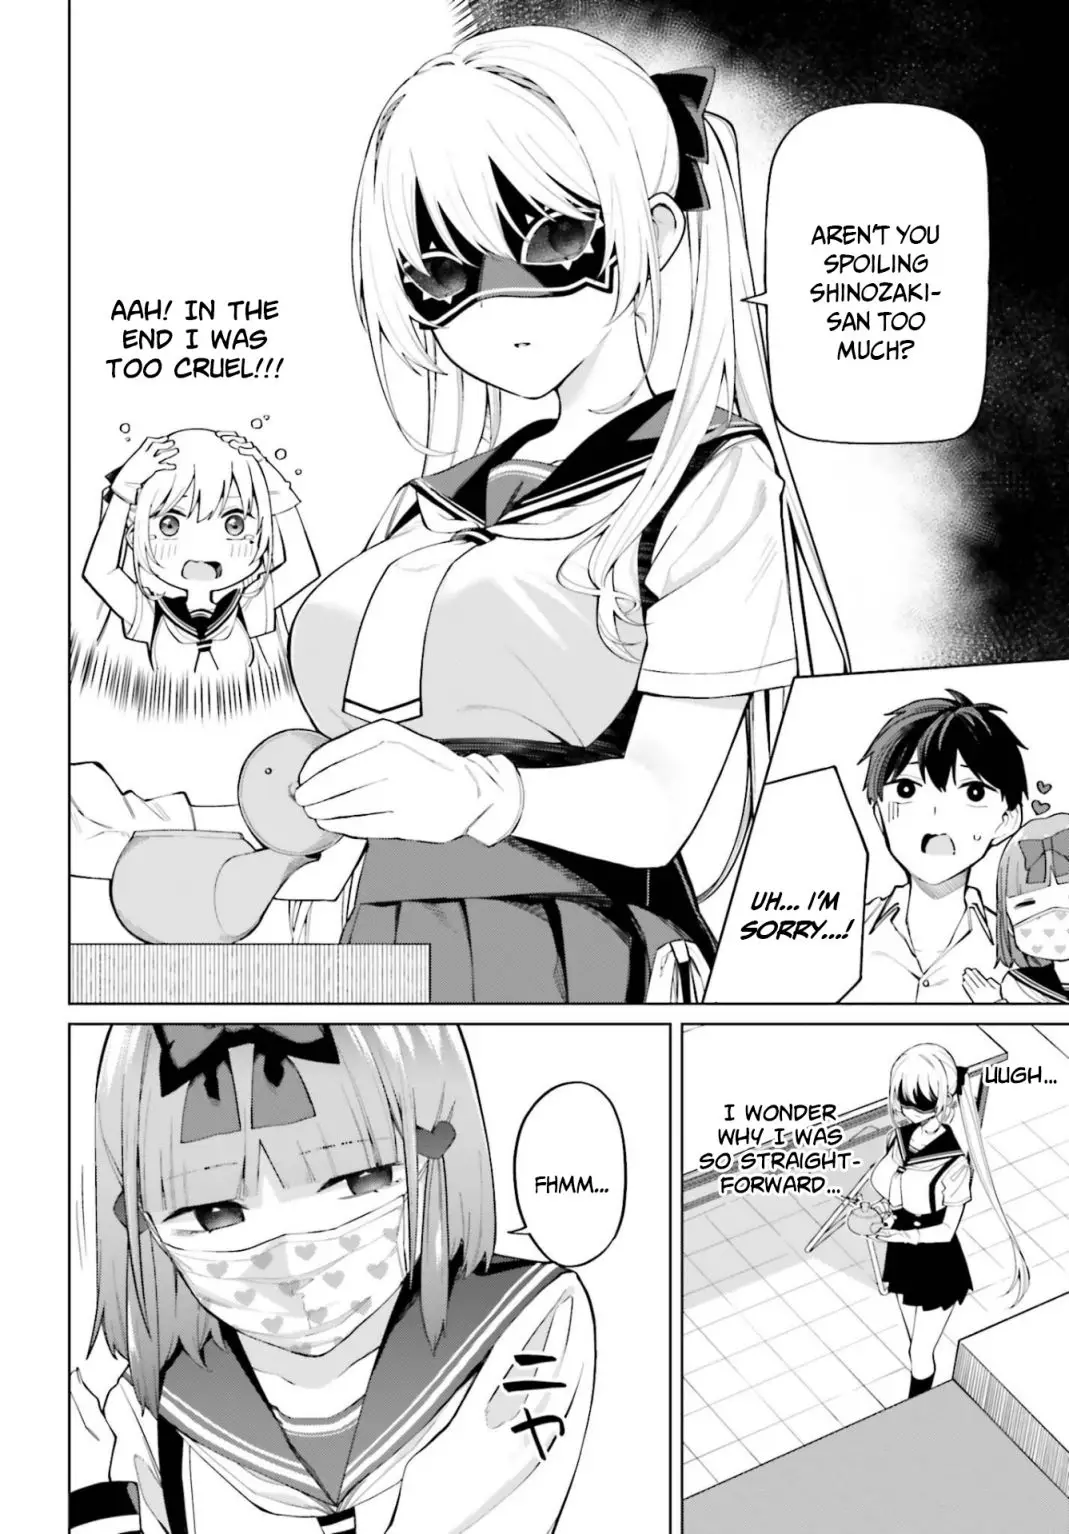 I Don't Understand Shirogane-San's Facial Expression At All - 9 page 9-66a0ae17